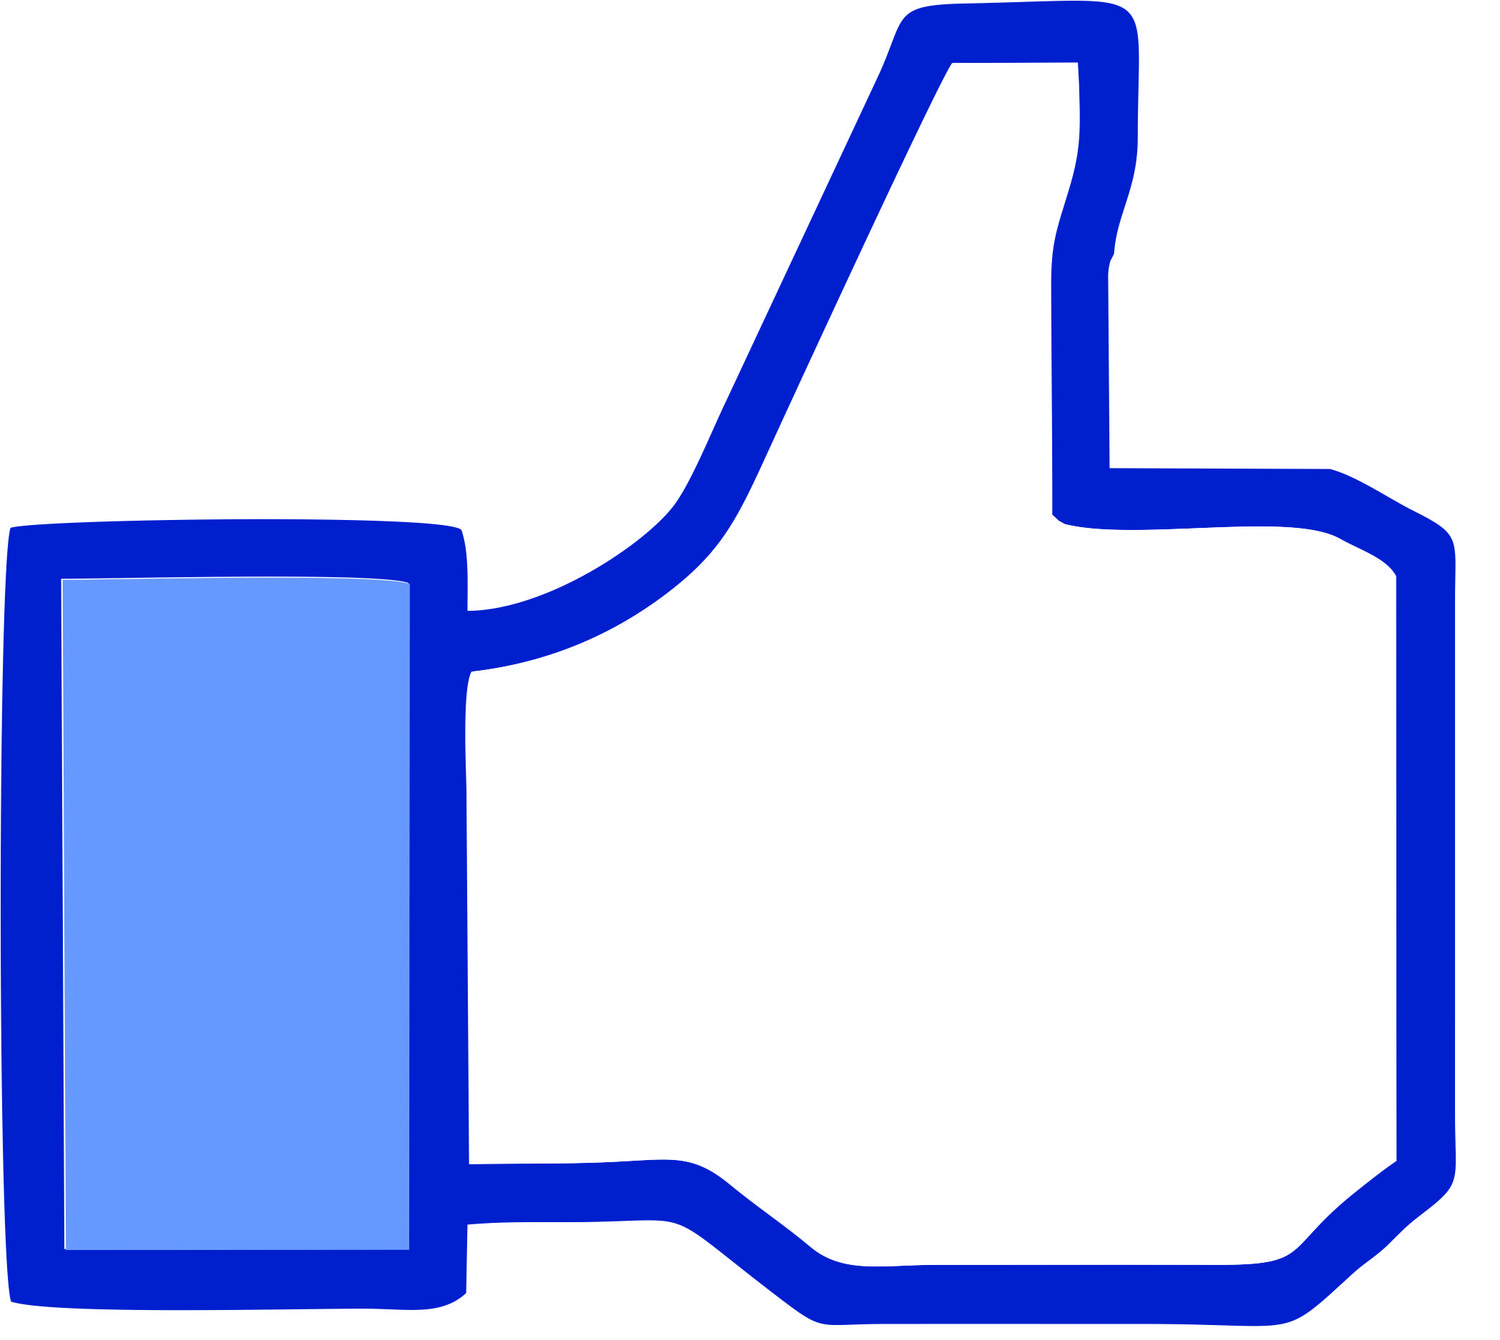 Thumbs Up Image